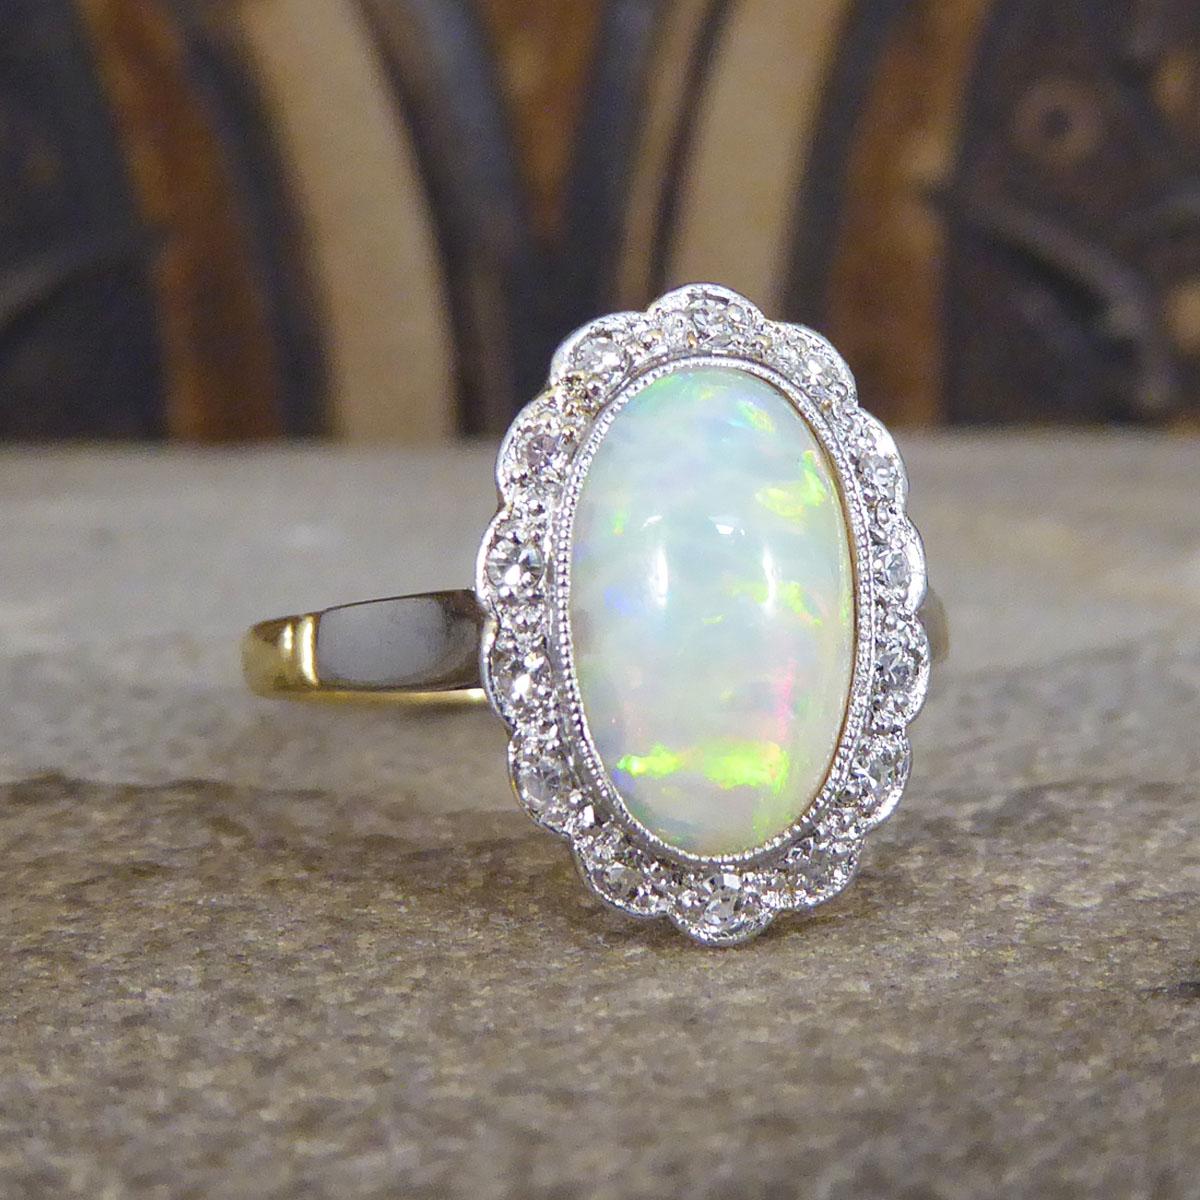 An exquisite and quality ring crafted in the Edwardian era. This wonderful ring features a lustrous Opal in the centre cut in an oval shape with great colours with many greens, blues, oranges and reds, all set in a collar setting with a millegrain